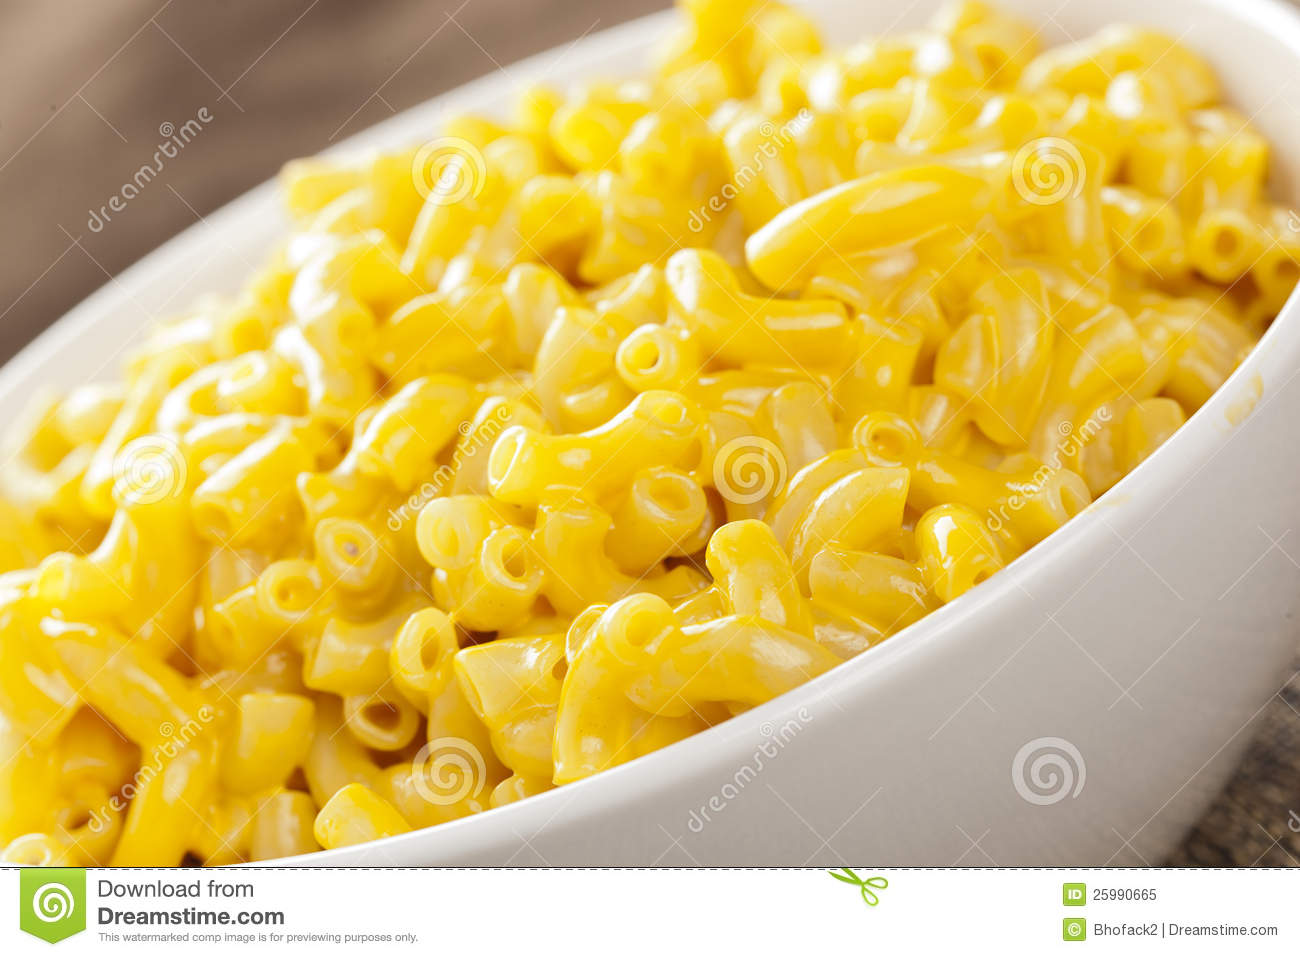 Macaroni And Cheese In A Bowl Royalty Free Stock Photo   Image    